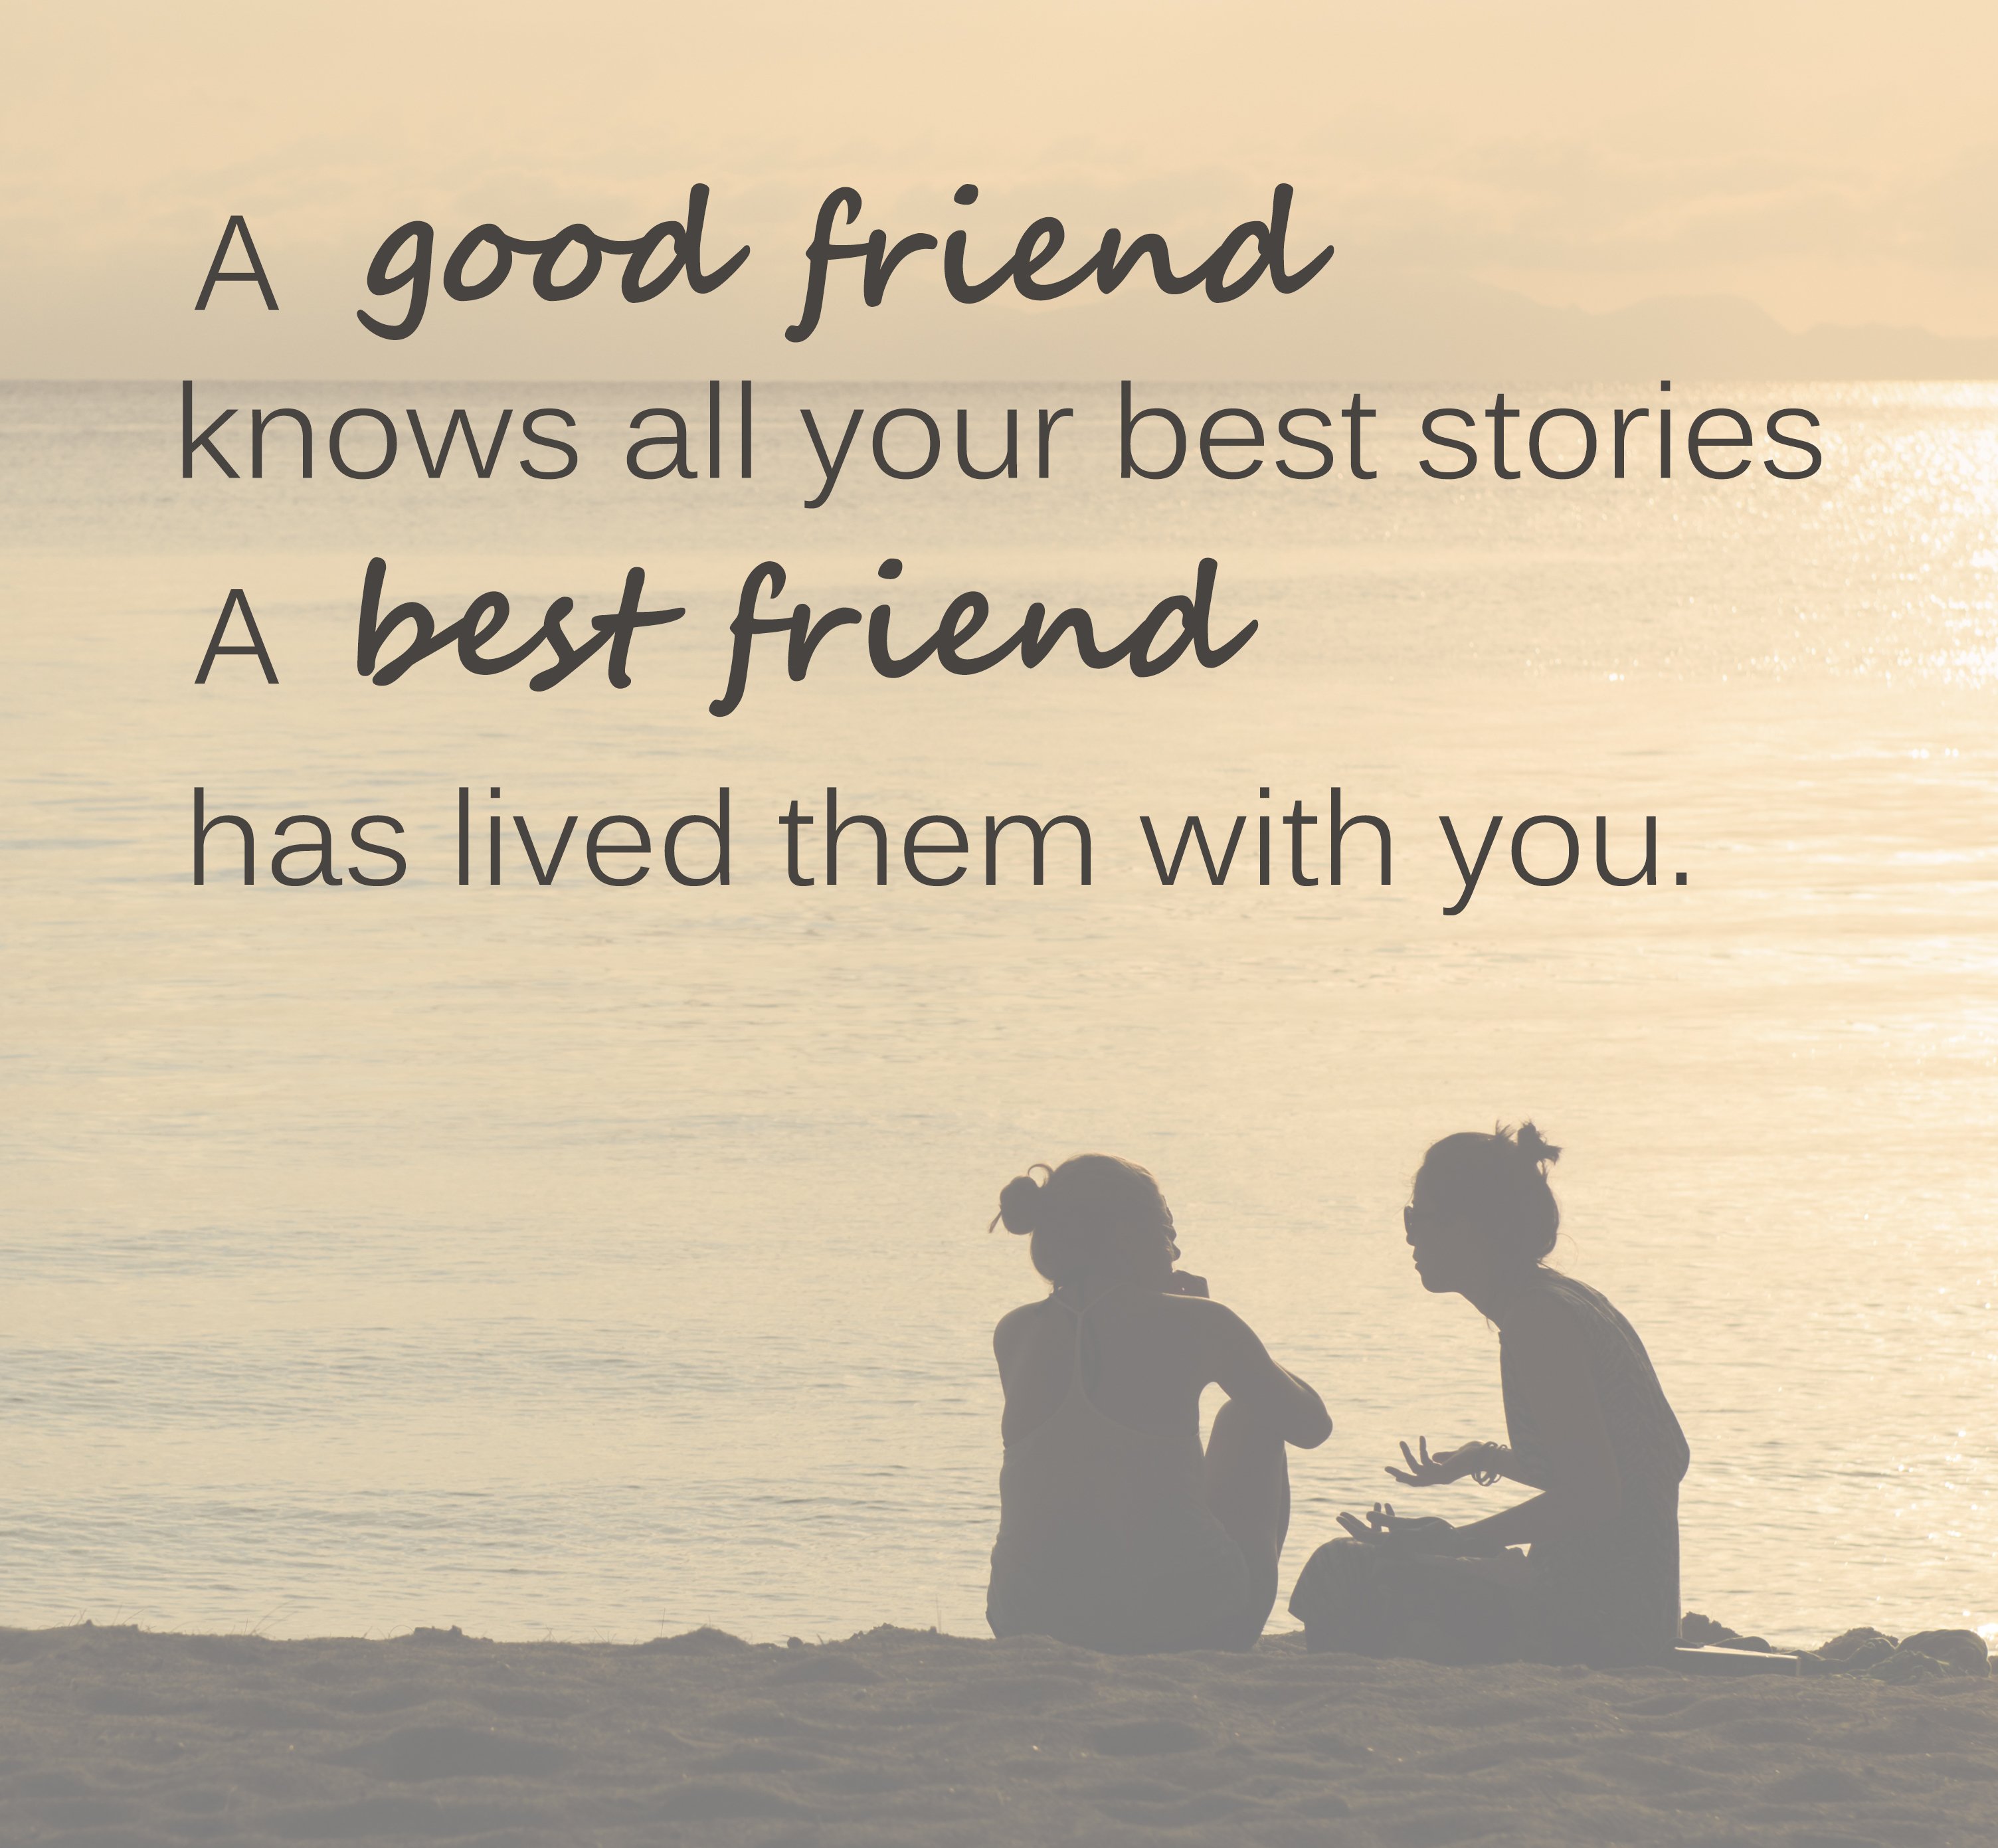 Happy Friendship Day 2022: Wishes, Image, Greetings, Quotes, Messages and WhatsApp Greetings to Share With Your Buddy